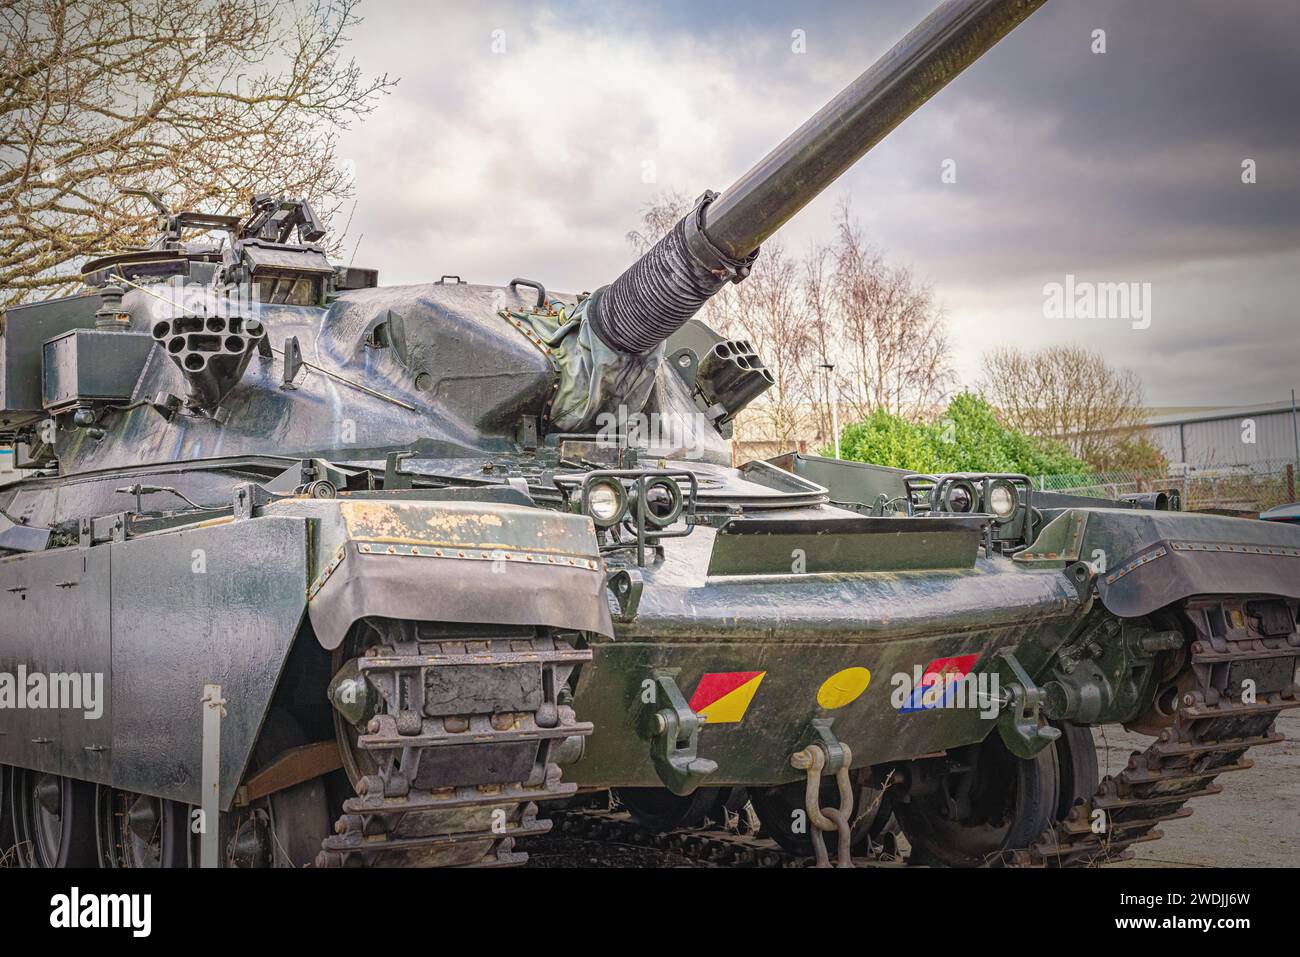 A Chieftain Main Battle Tank on display at a an air museum. The 120mm gun is elevated and there is a sky with cloud above. Stock Photo